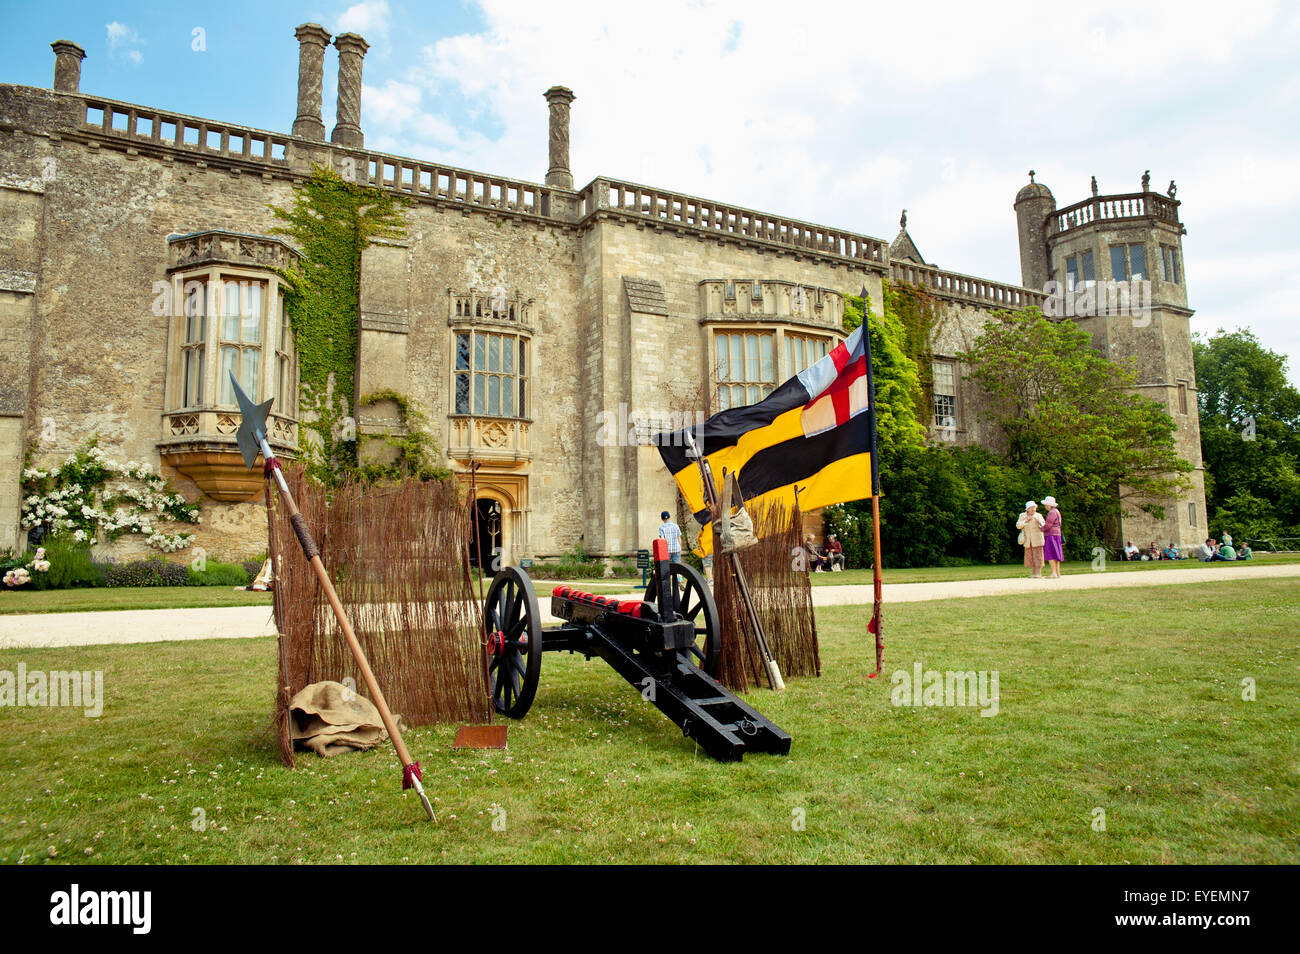 Cannon And Tourists In Front Of Lacock Abbey, Lacock, Wiltshire, Uk Stock Photo